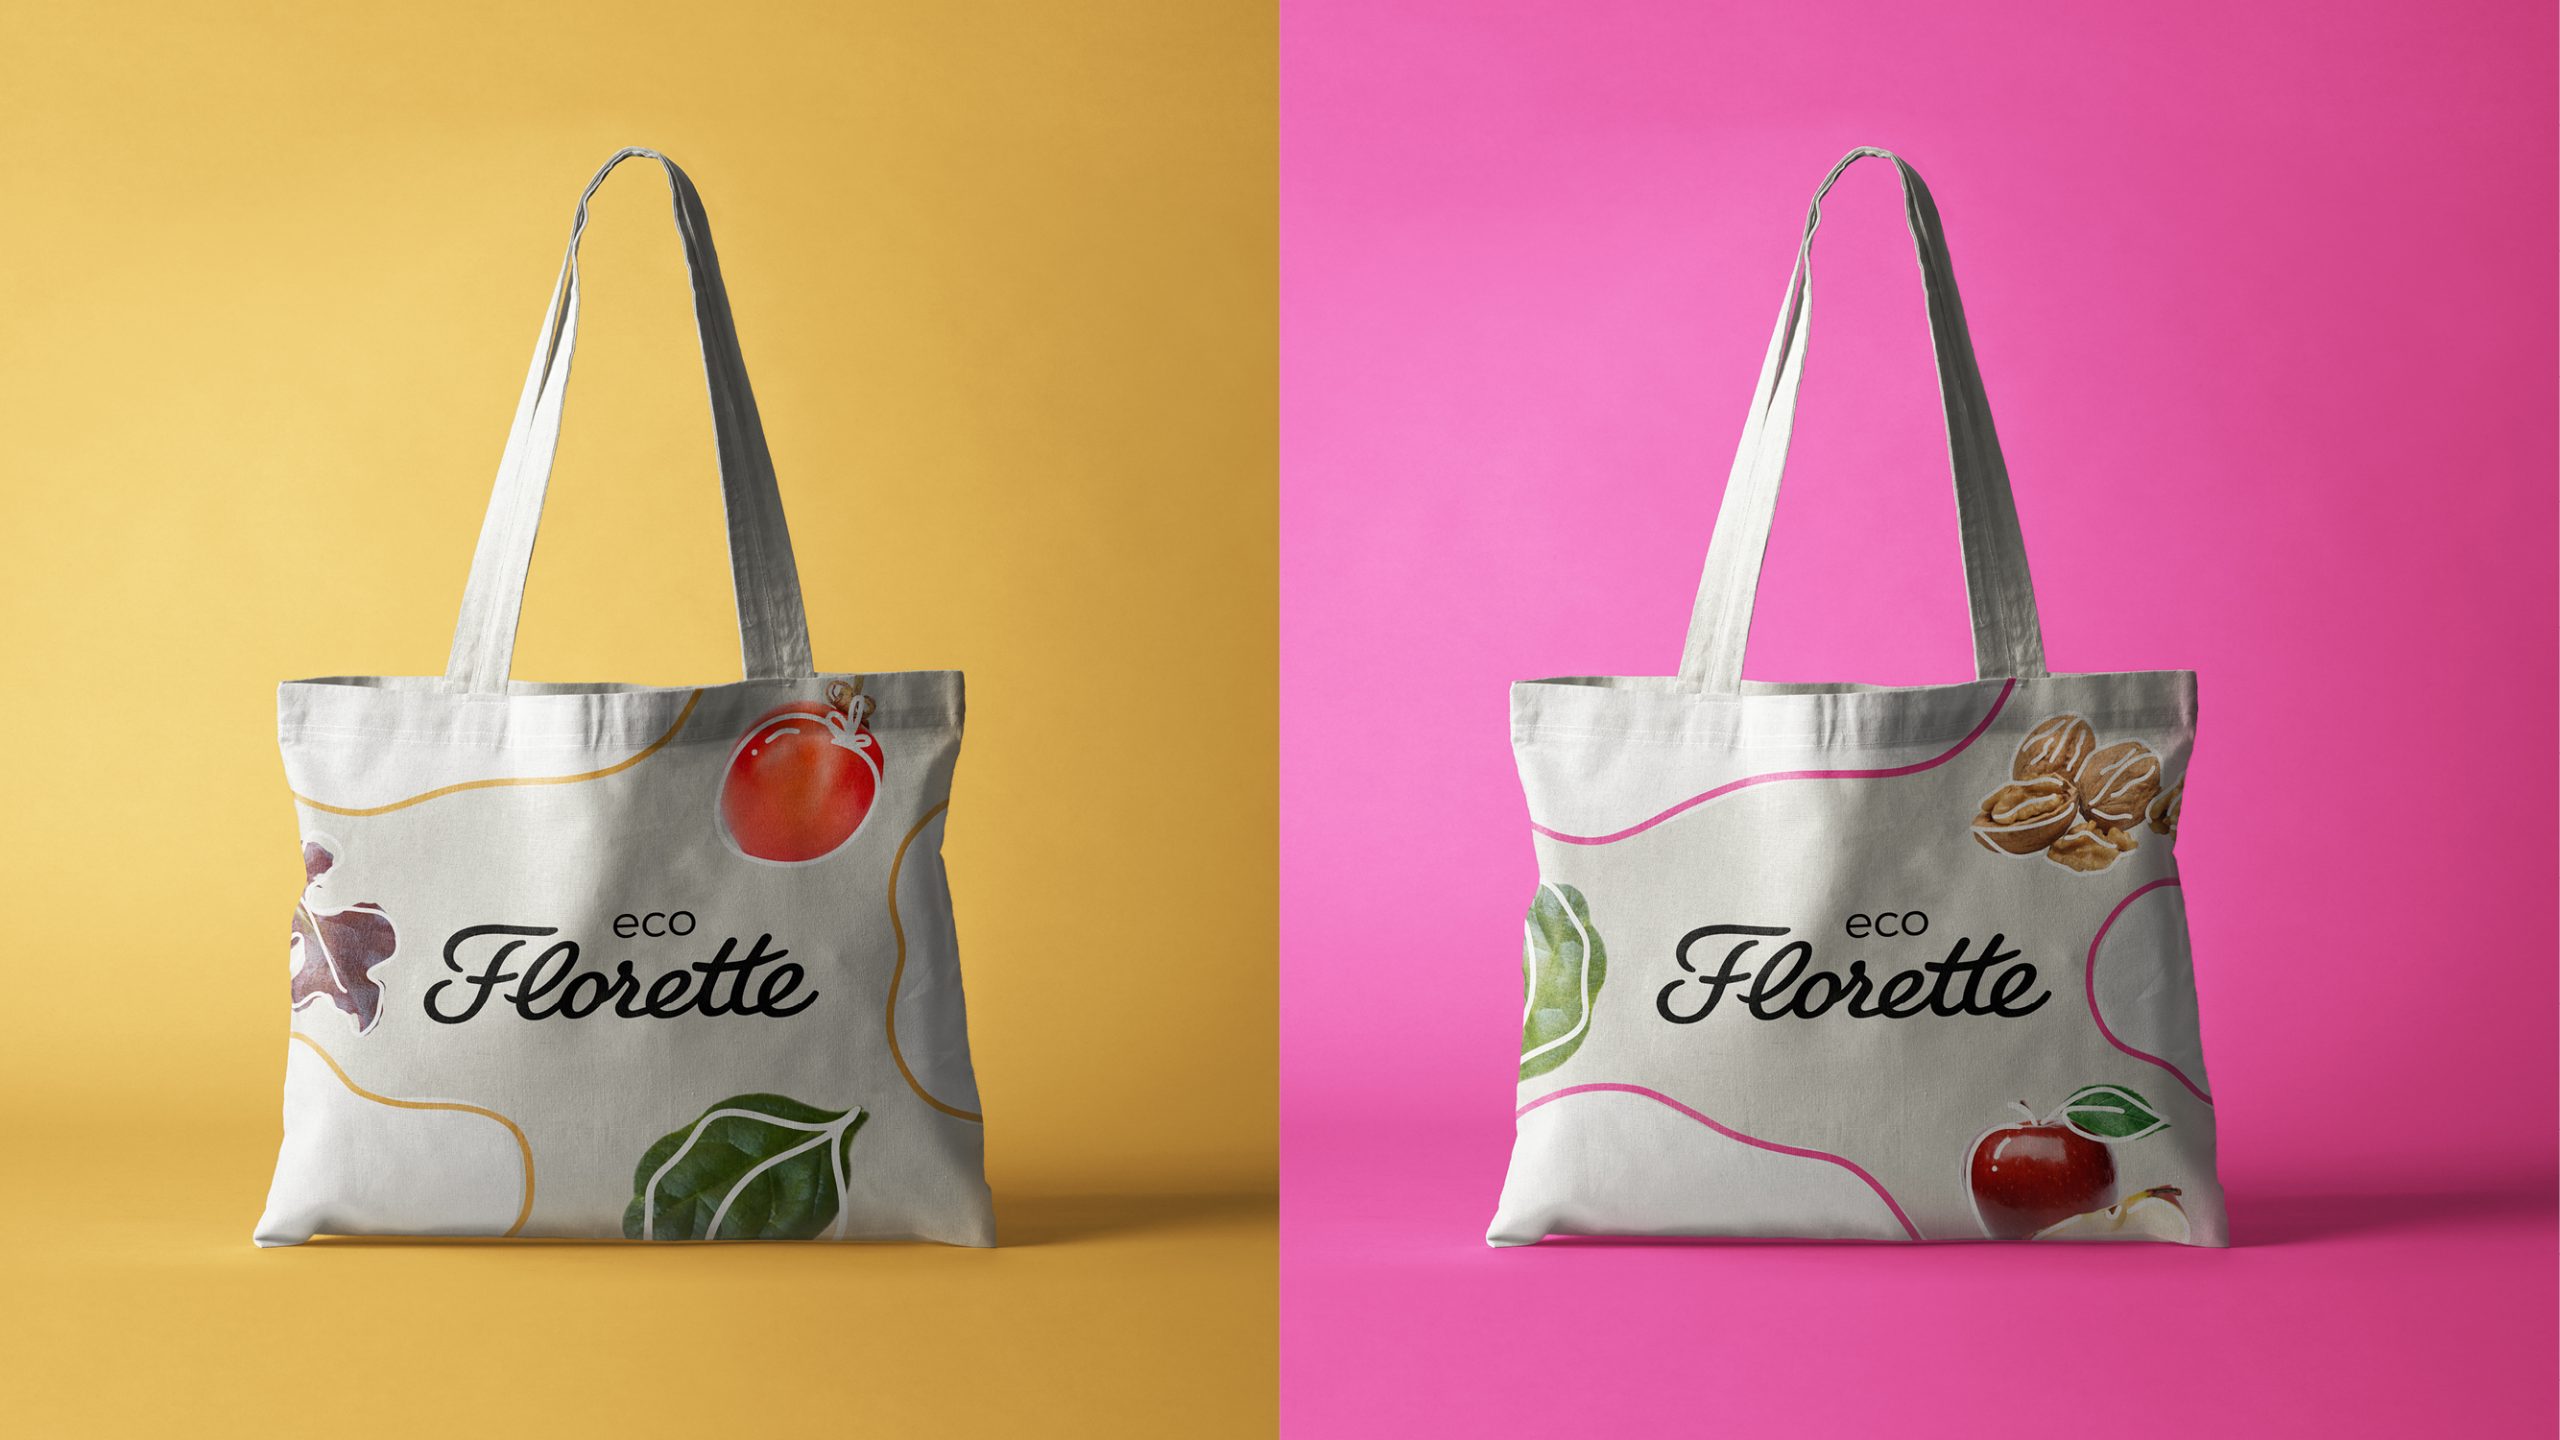 2 tote bags for the launch of the new pack for Florette Eco